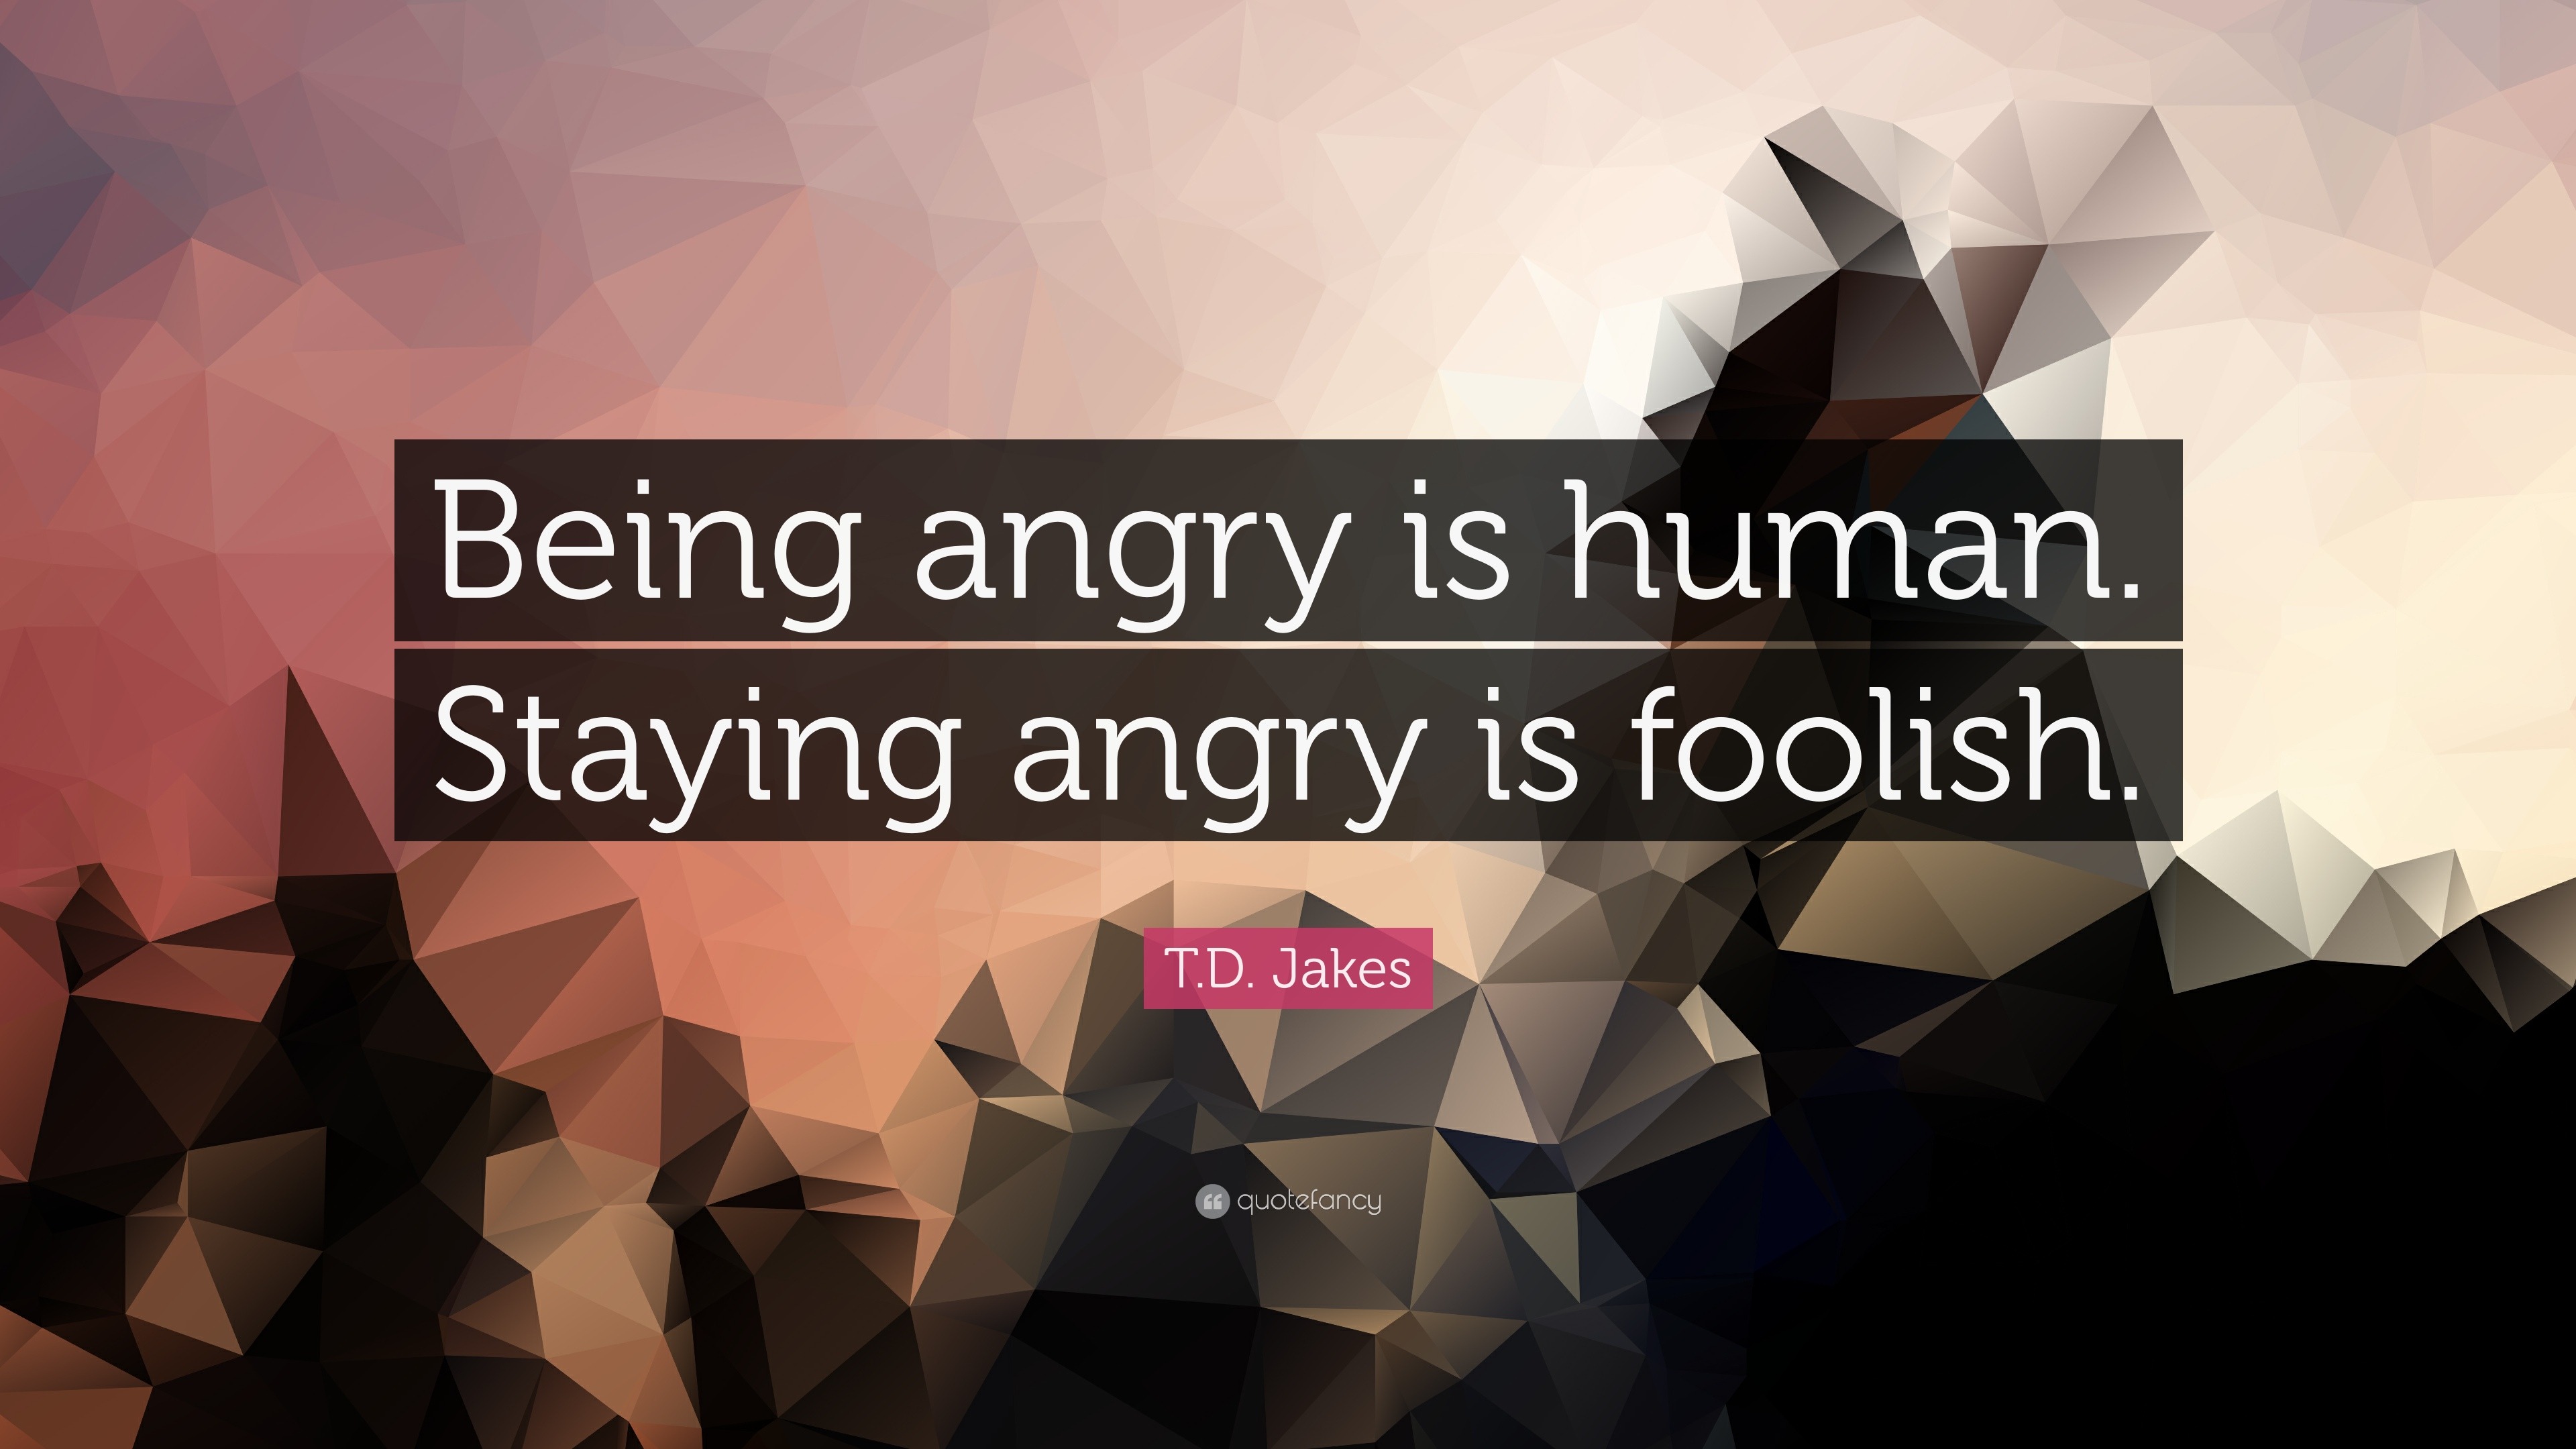 T.D. Jakes Quote: “Being angry is human. Staying angry is foolish.” (20